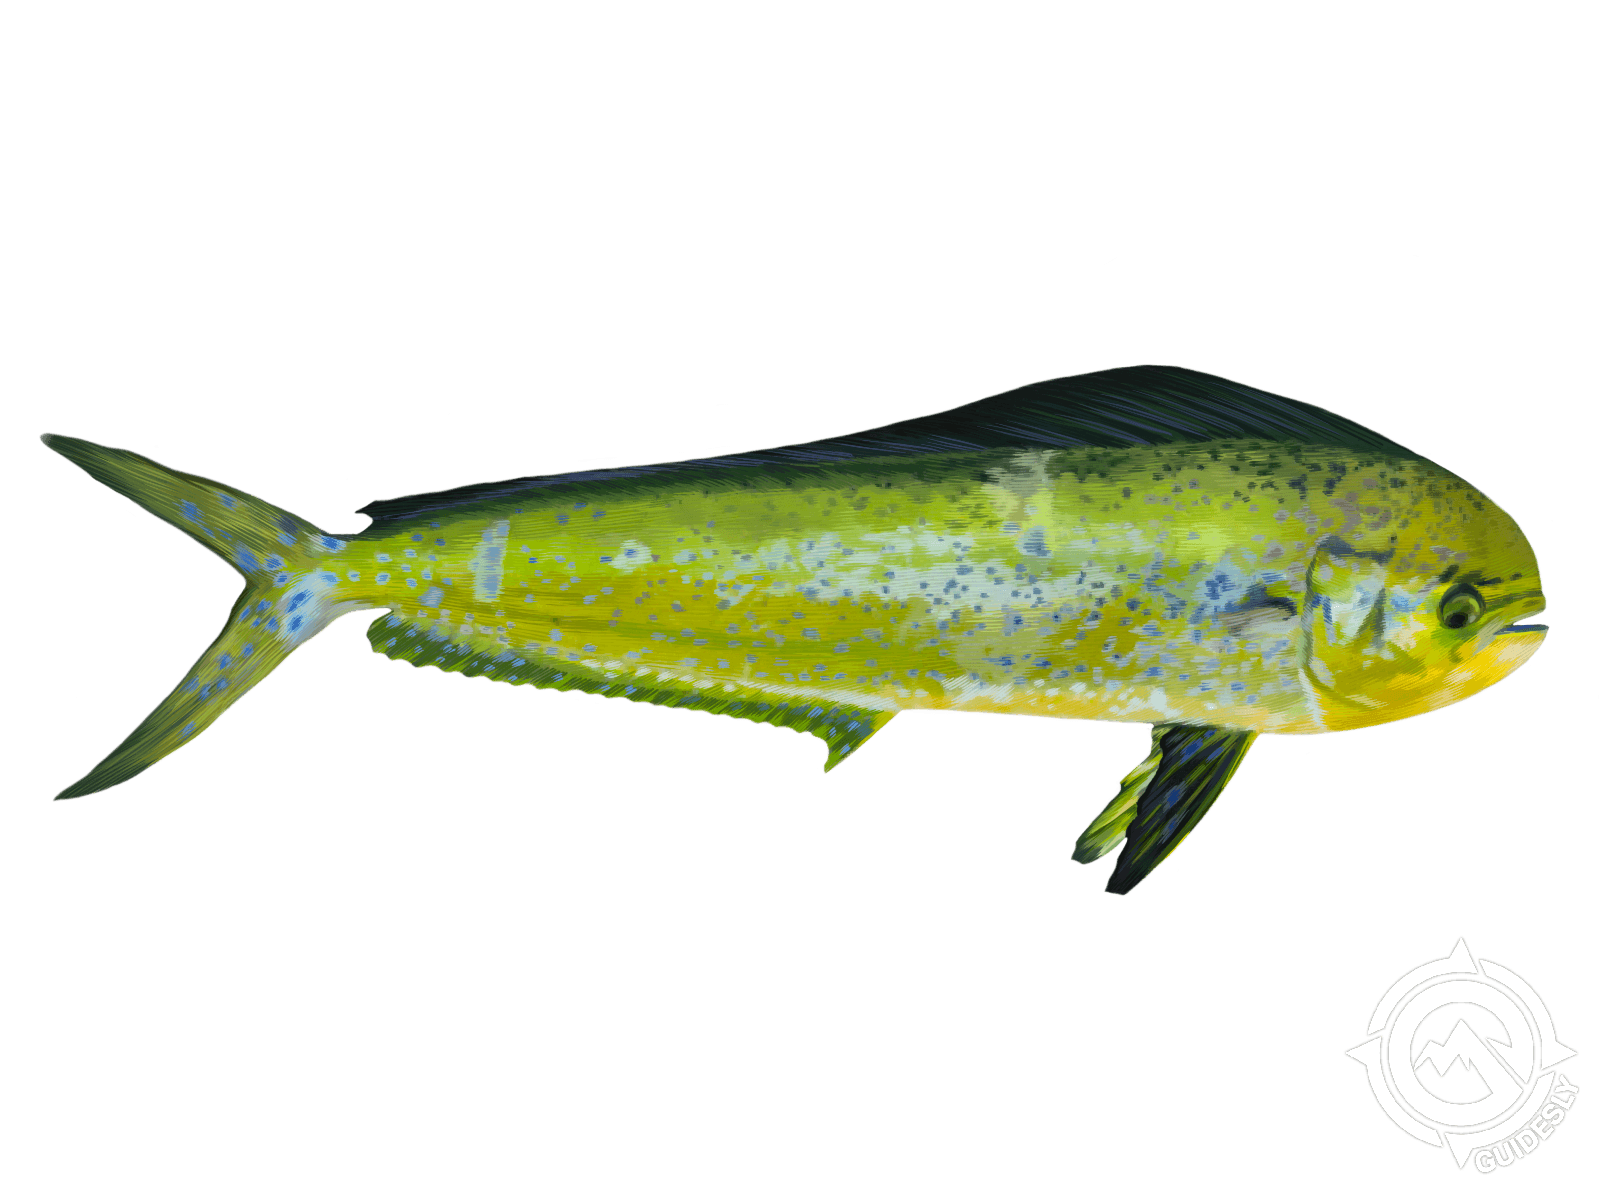 Large Fish With Yellow Spots Is Swimming In The Water Background Picture  Of A Mahi Mahi Fish Background Image And Wallpaper for Free Download